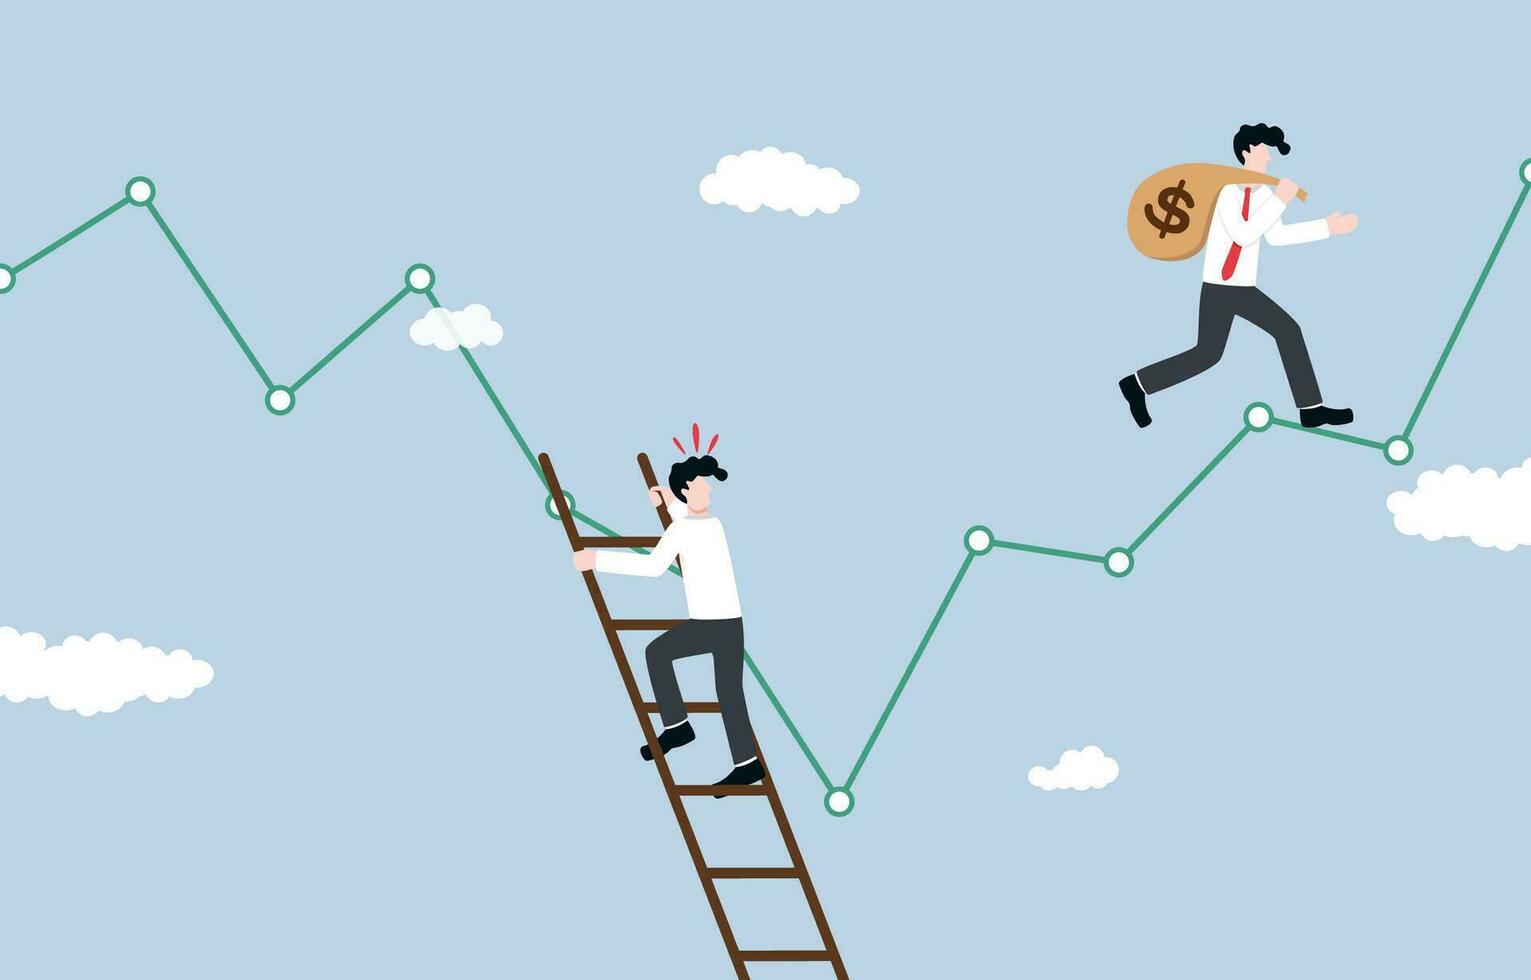 Lose opportunity to profit from stock market, false speculation concept, Businessman climbing down ladder against downtrend graph while another investor carrying money bag on uptrend graph. vector